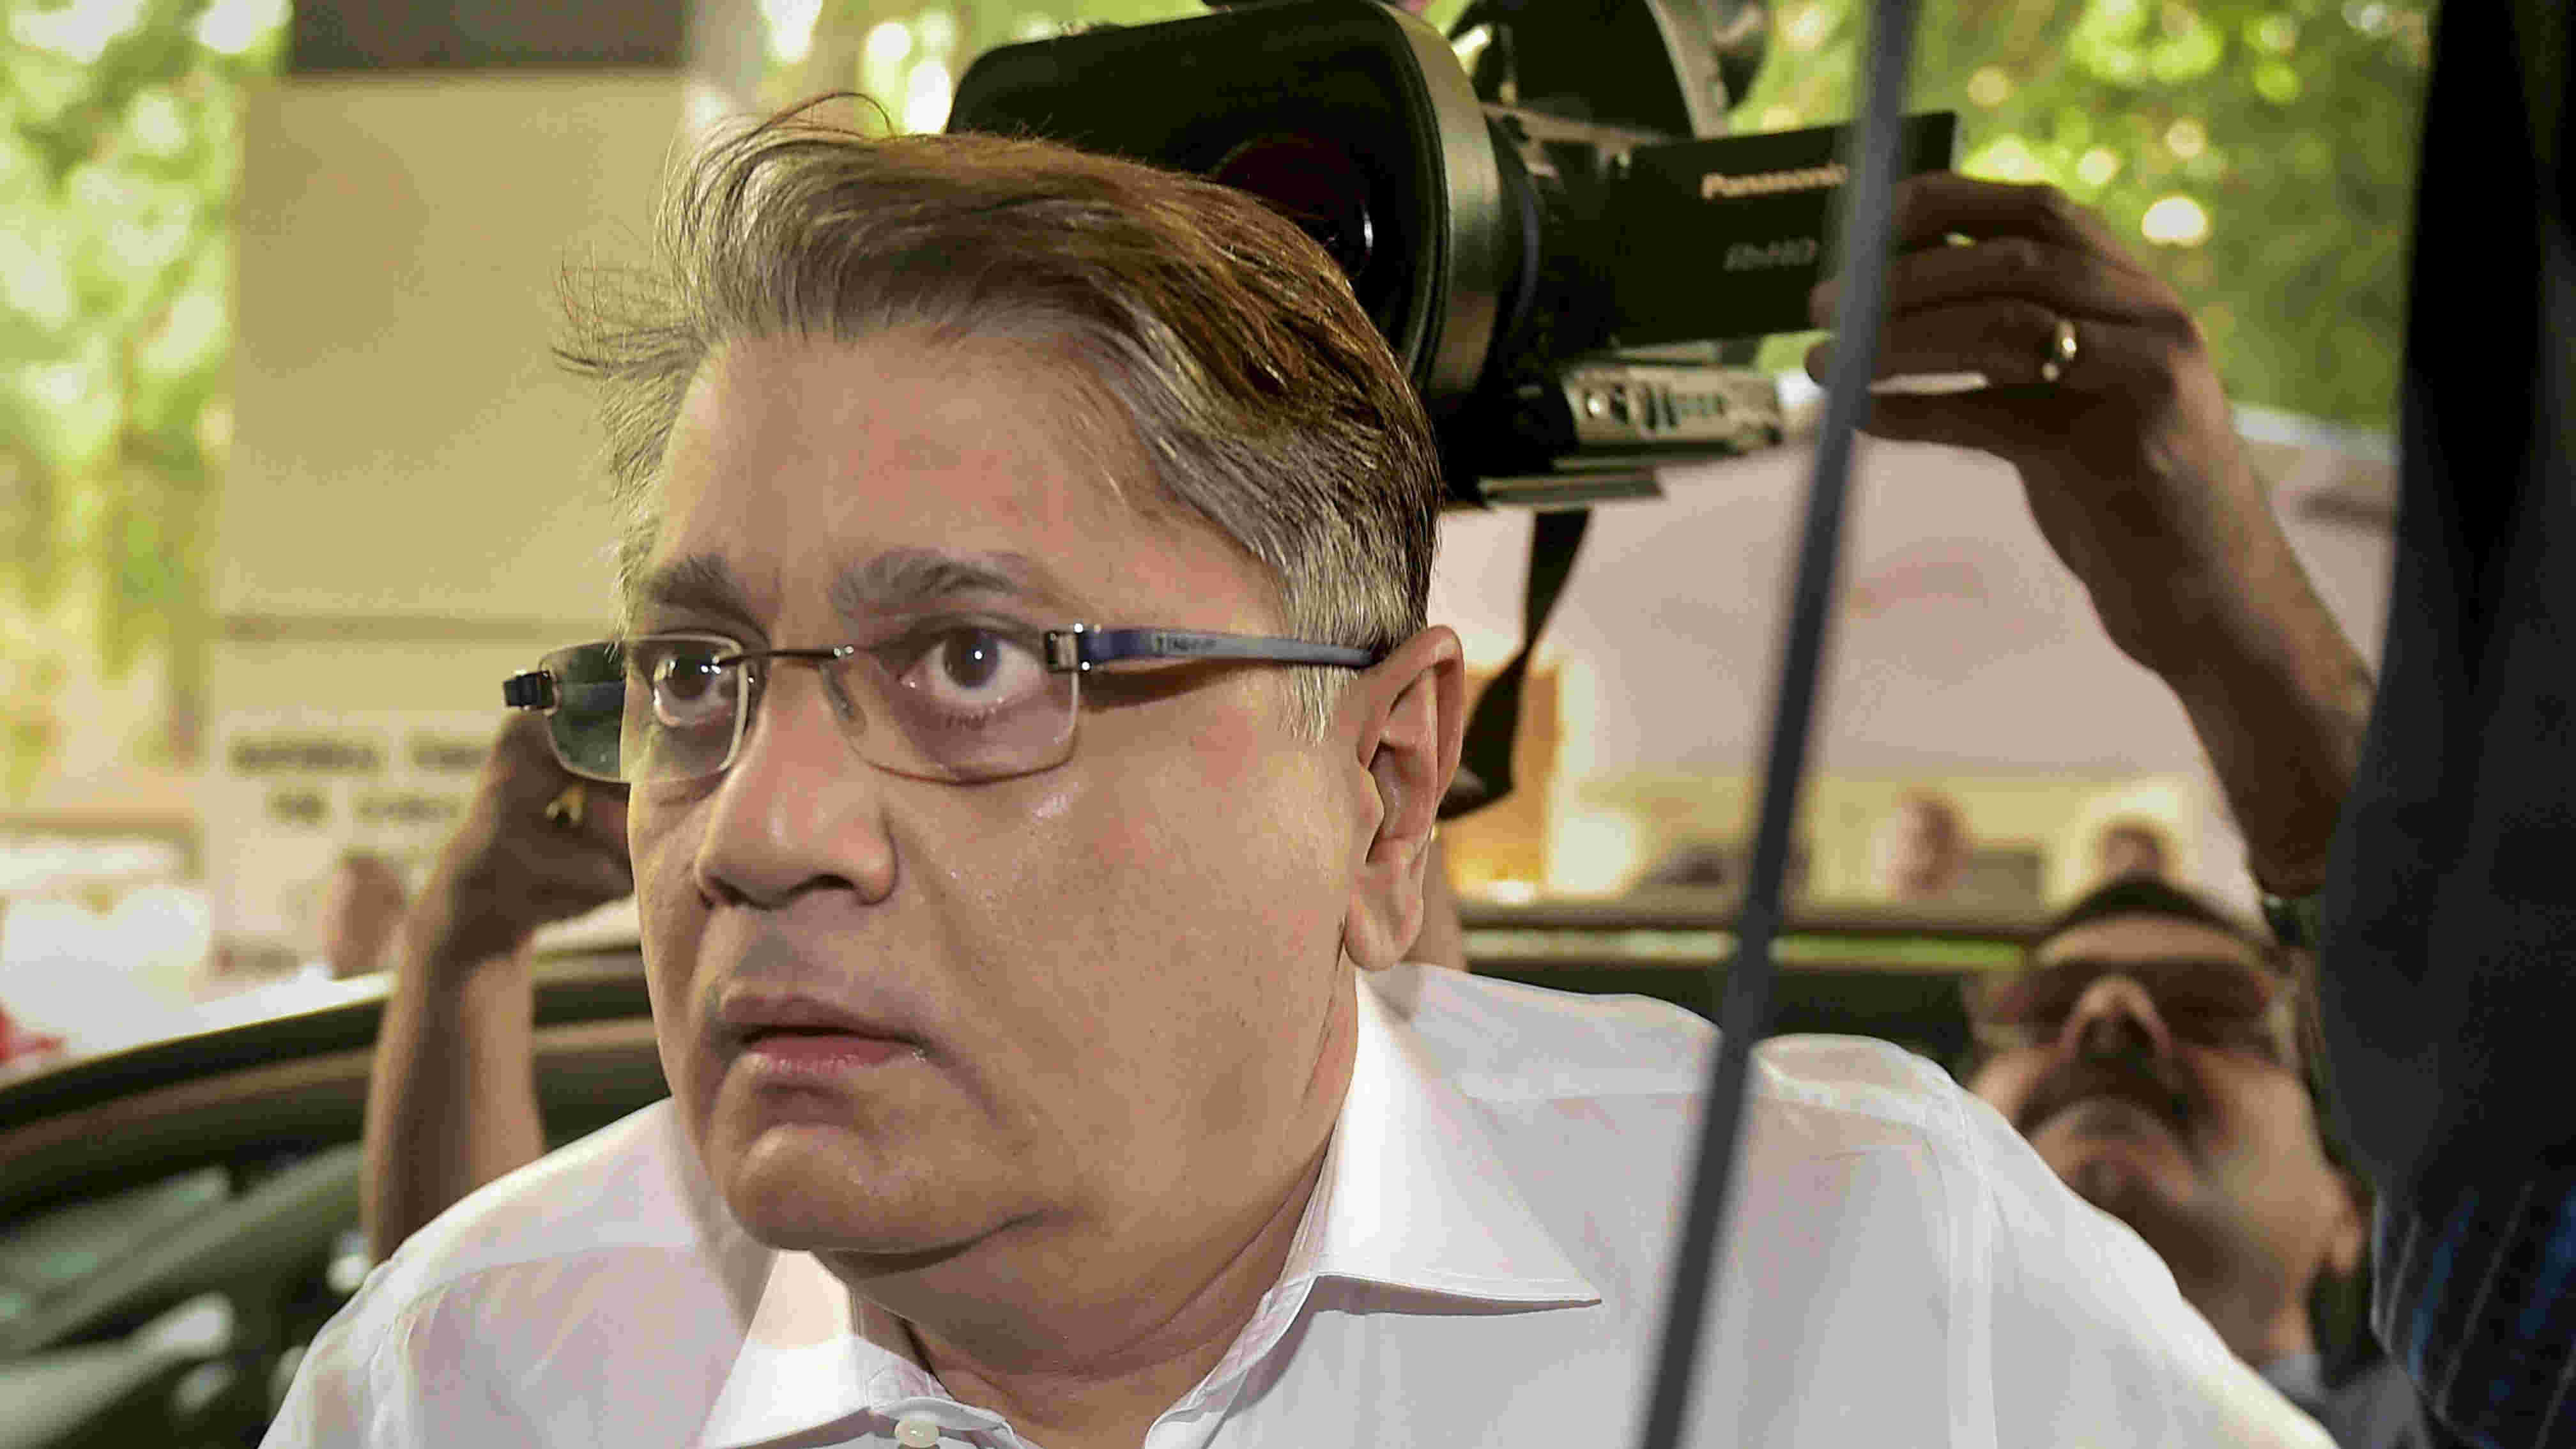  In this file photo, dated Monday, May 13, 2019, Deepak Kochhar, husband of former ICICI Bank CEO Chanda Kochhar, arrives to appear before Enforcement Directorate (ED) in connection with a bank loan fraud and money laundering case probe, in New Delhi. The Enforcement Directorate on Monday, Sept. 7, 2020, arrested Deepak Kochhar in a money laundering case.